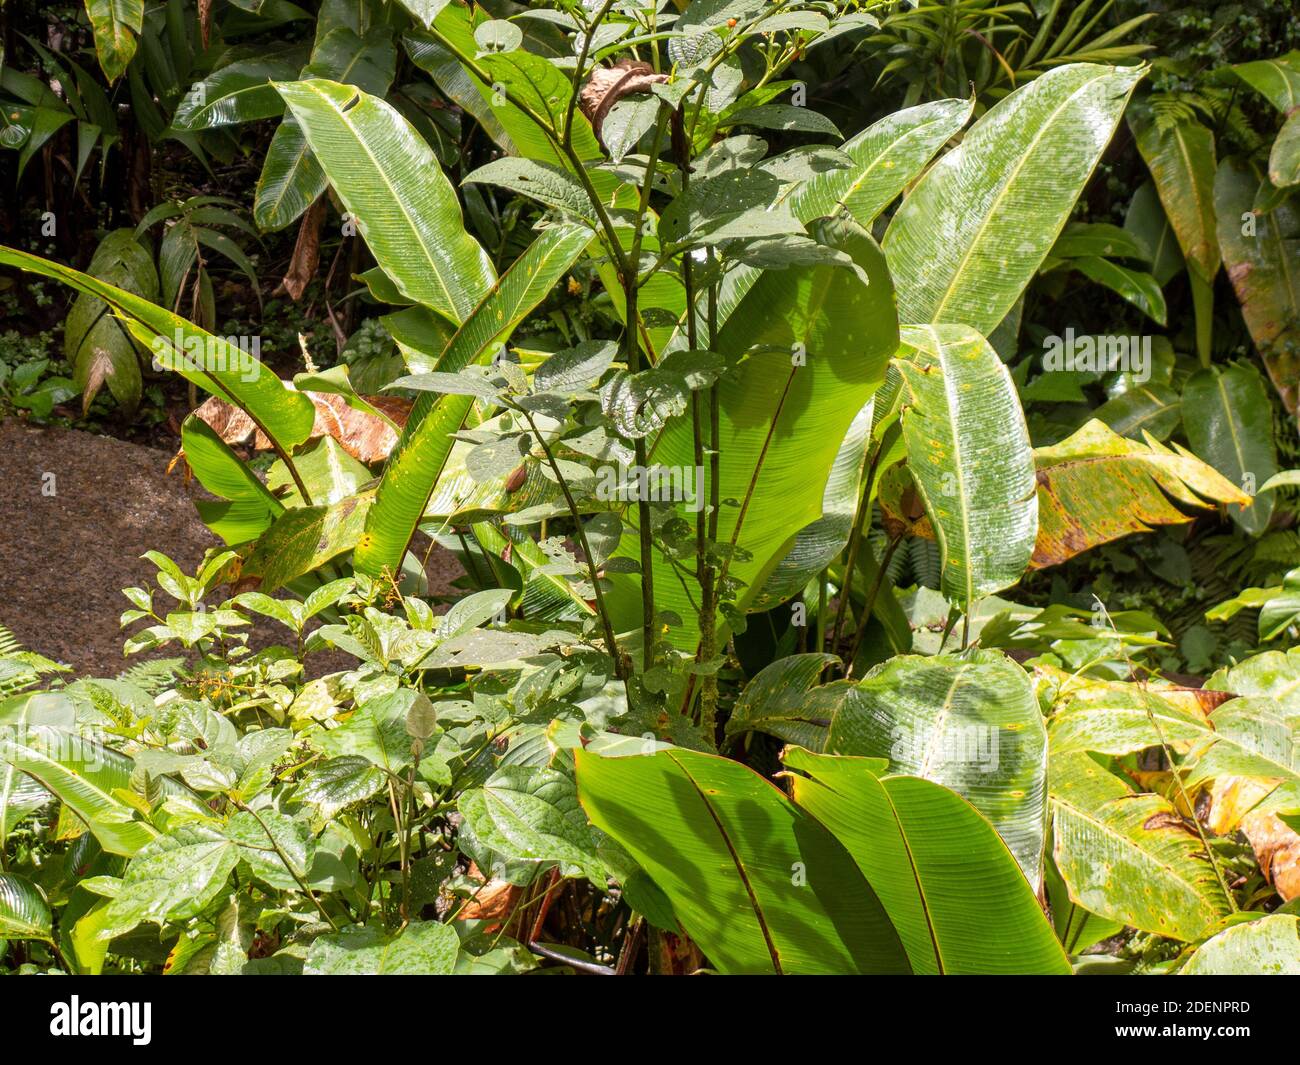 Hike through the rainforest of Costa Rica. Everything is green. Leaves and ferns of different plants can be seen on the ground. Stock Photo